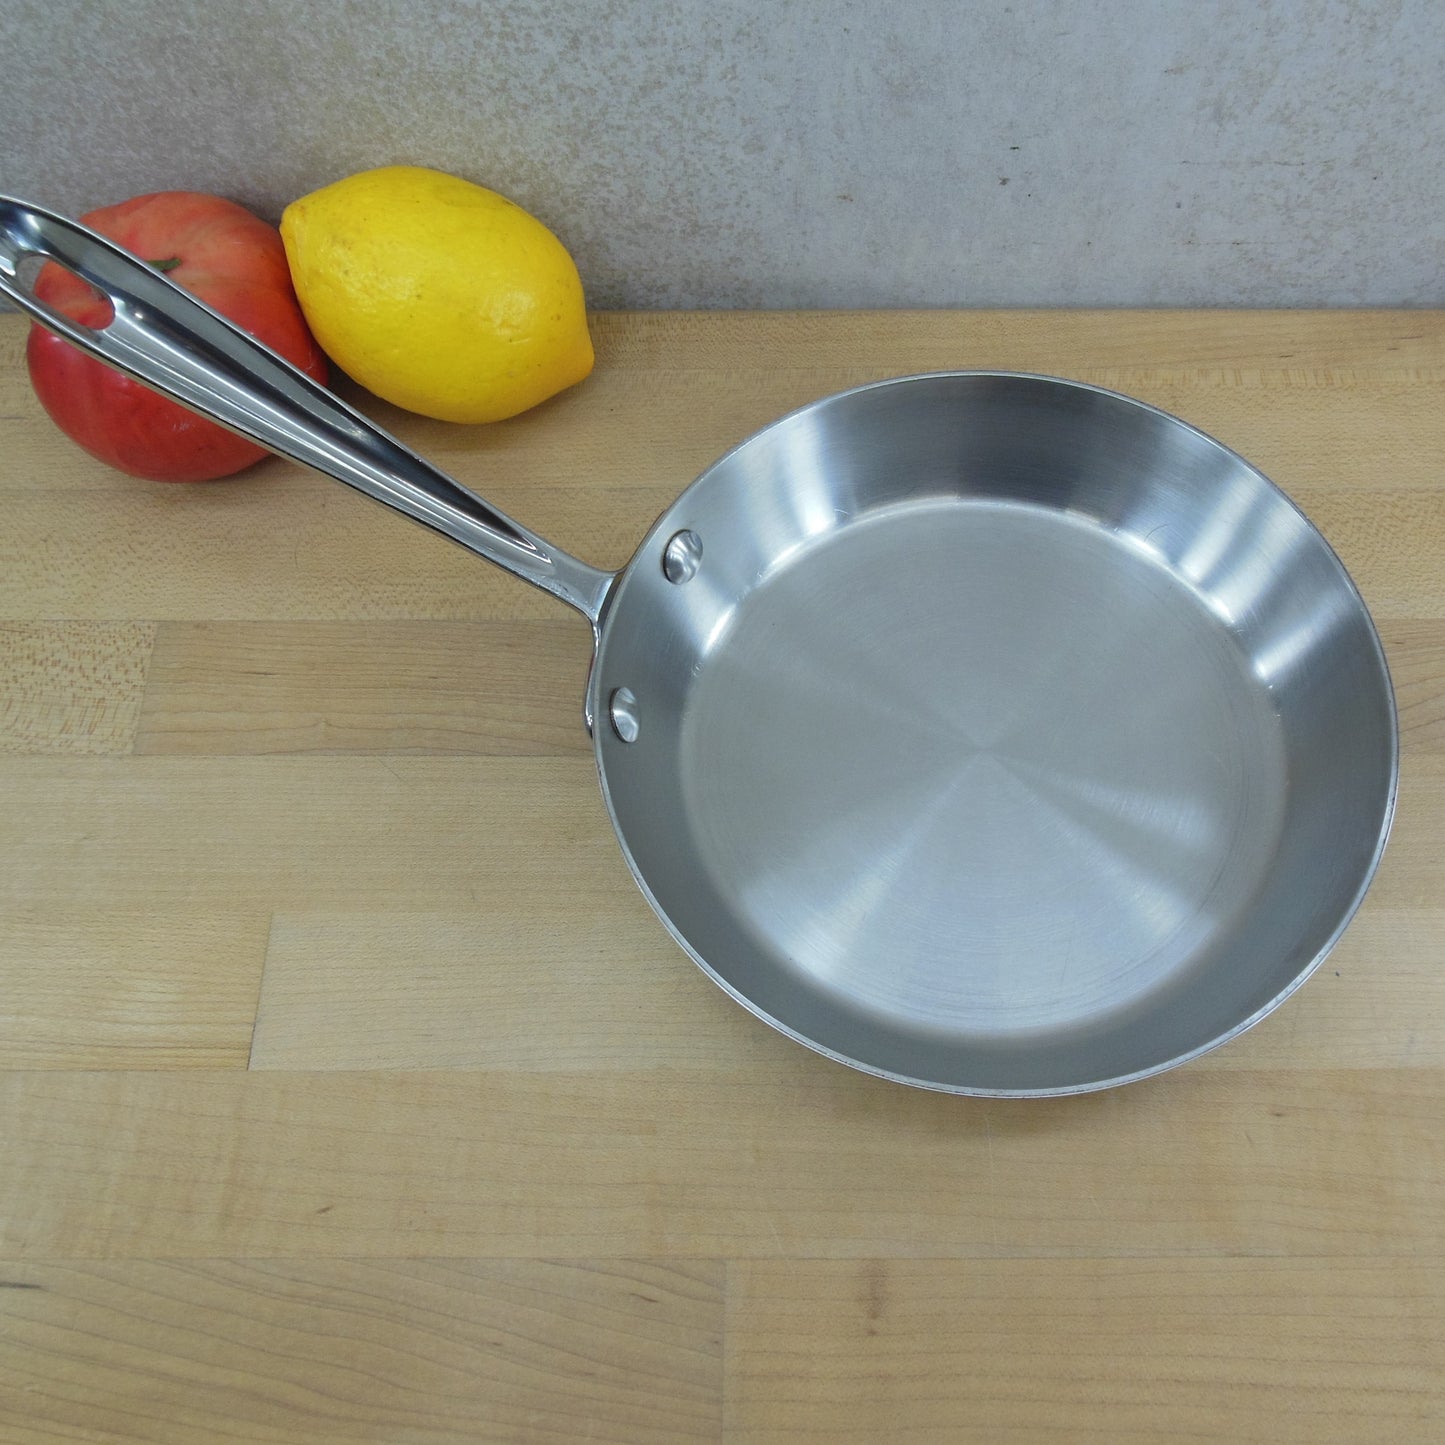 All-Clad USA Tri-Ply Stainless French Skillet 7-1/2" used